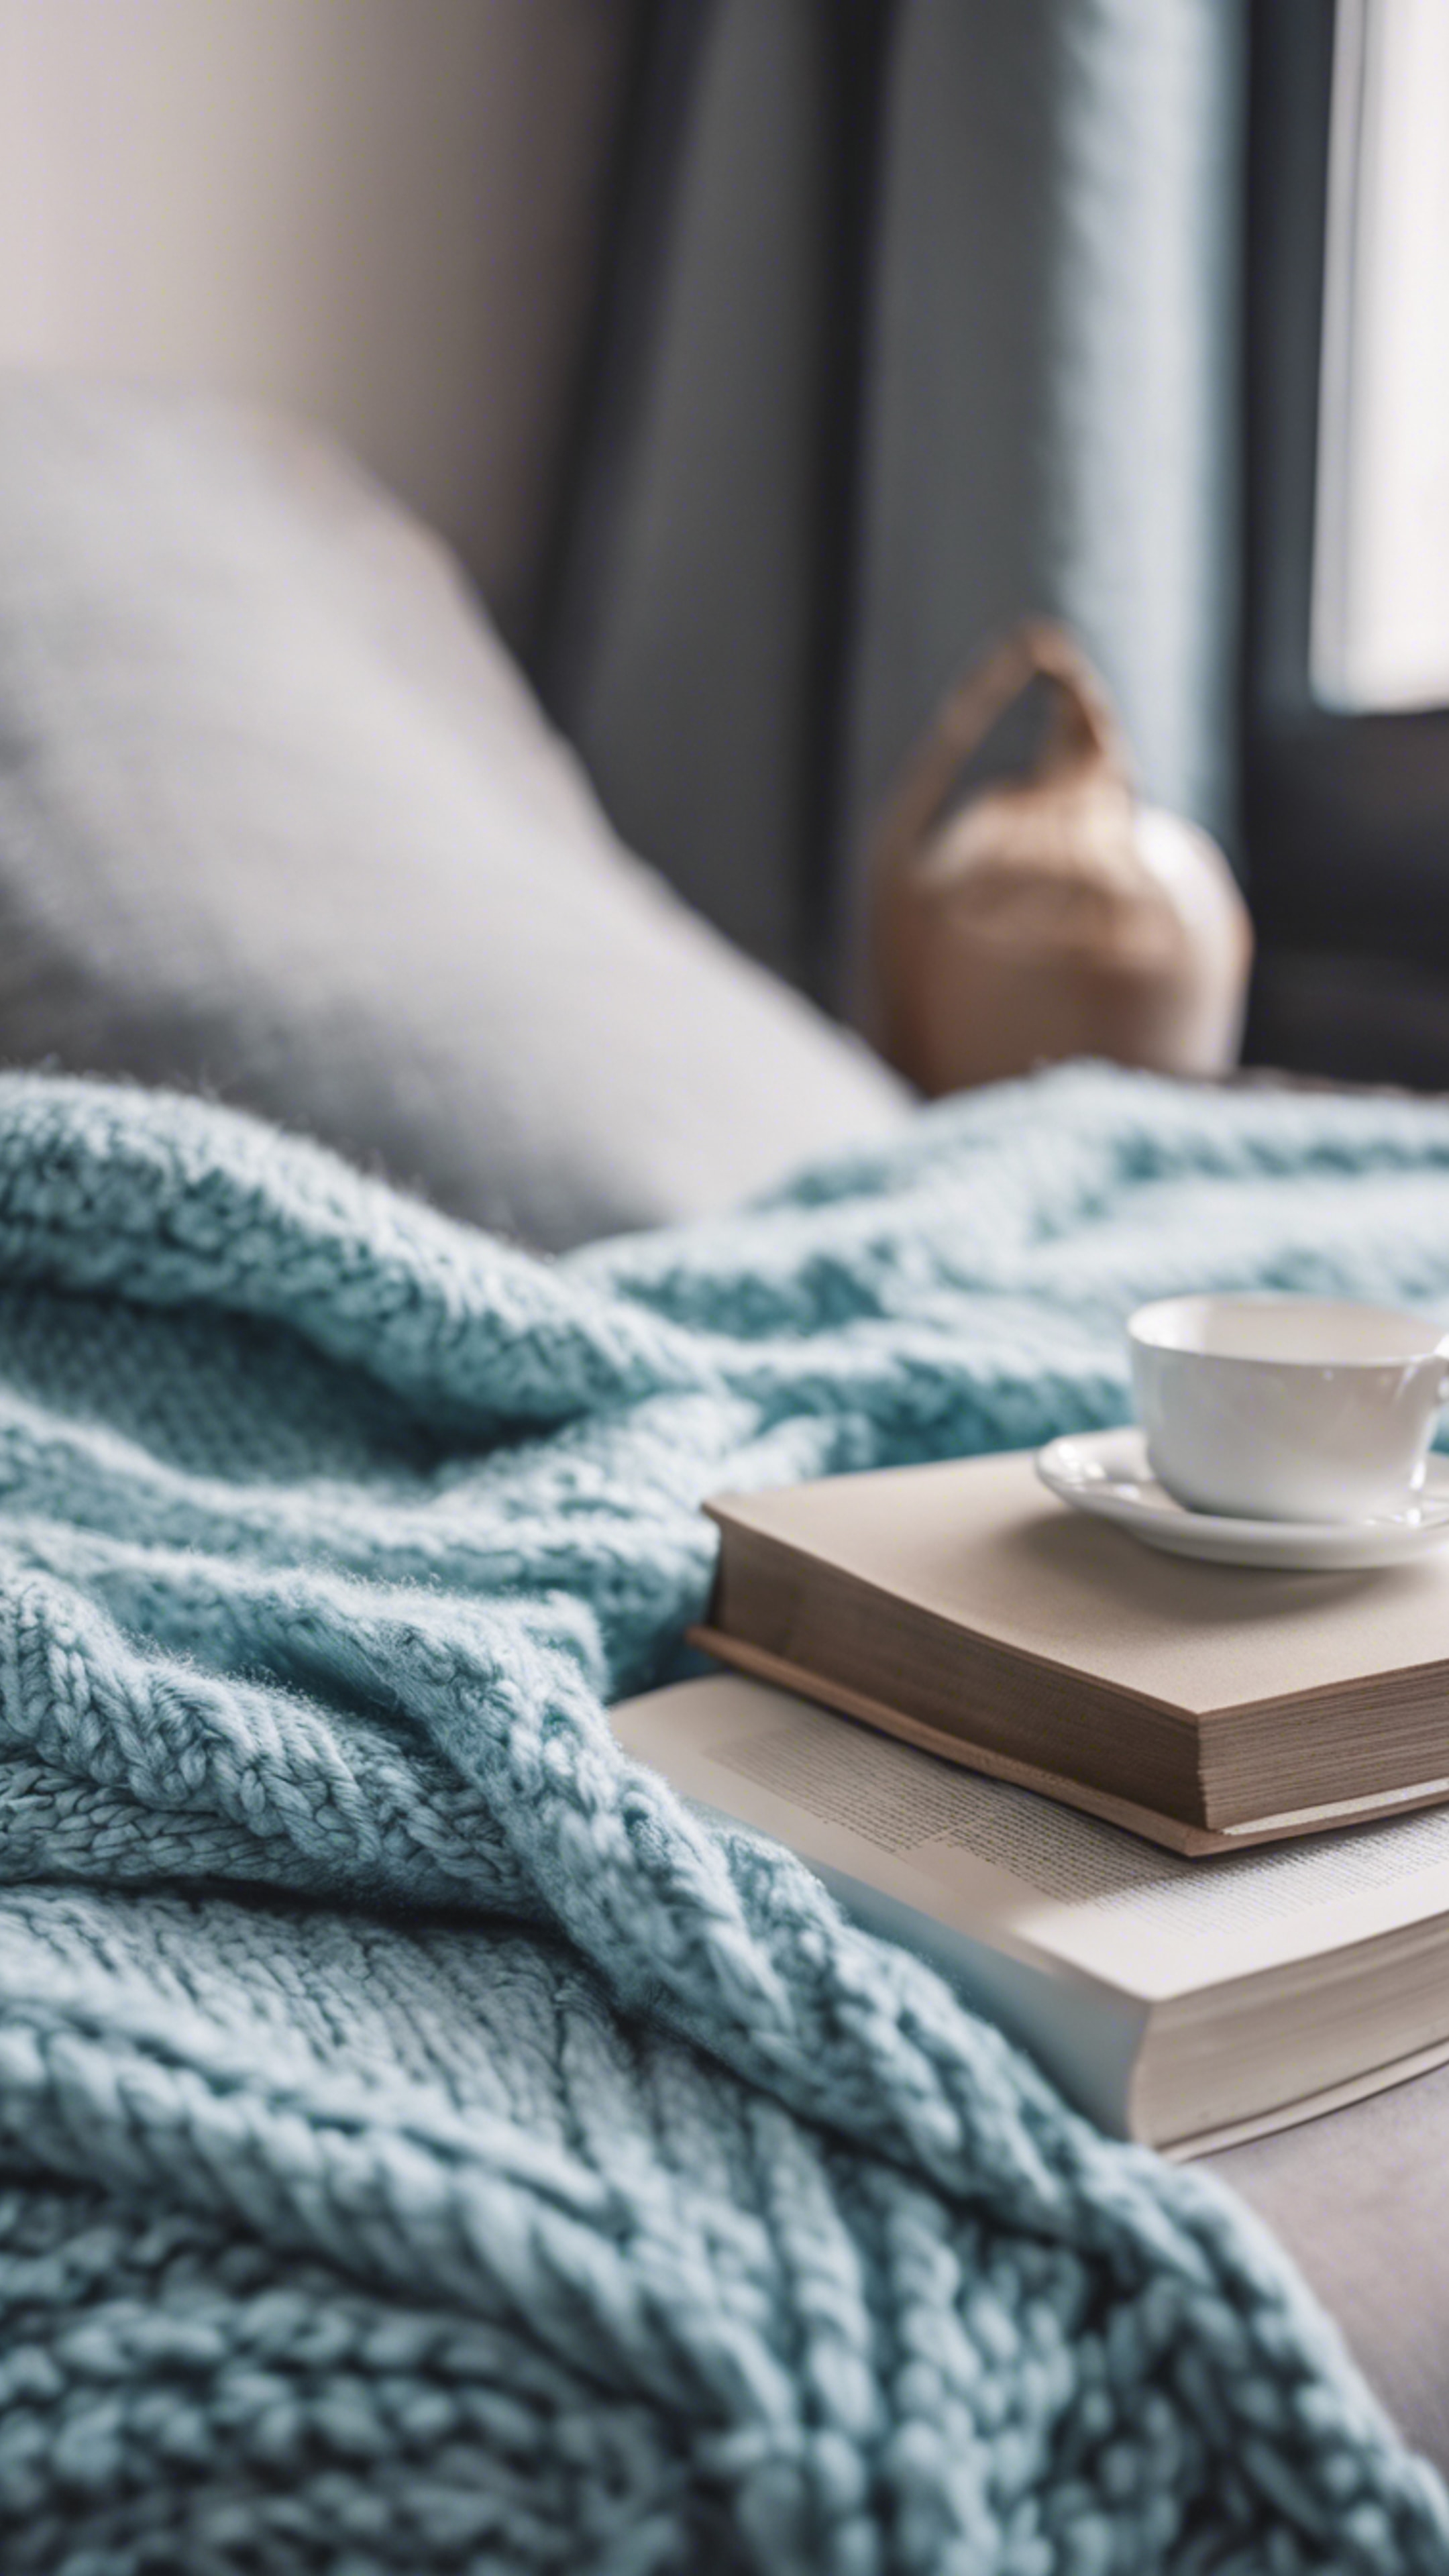 A comfy pastel blue knit blanket on a cozy reading nook.壁紙[8b9dbef051e3475cbaed]